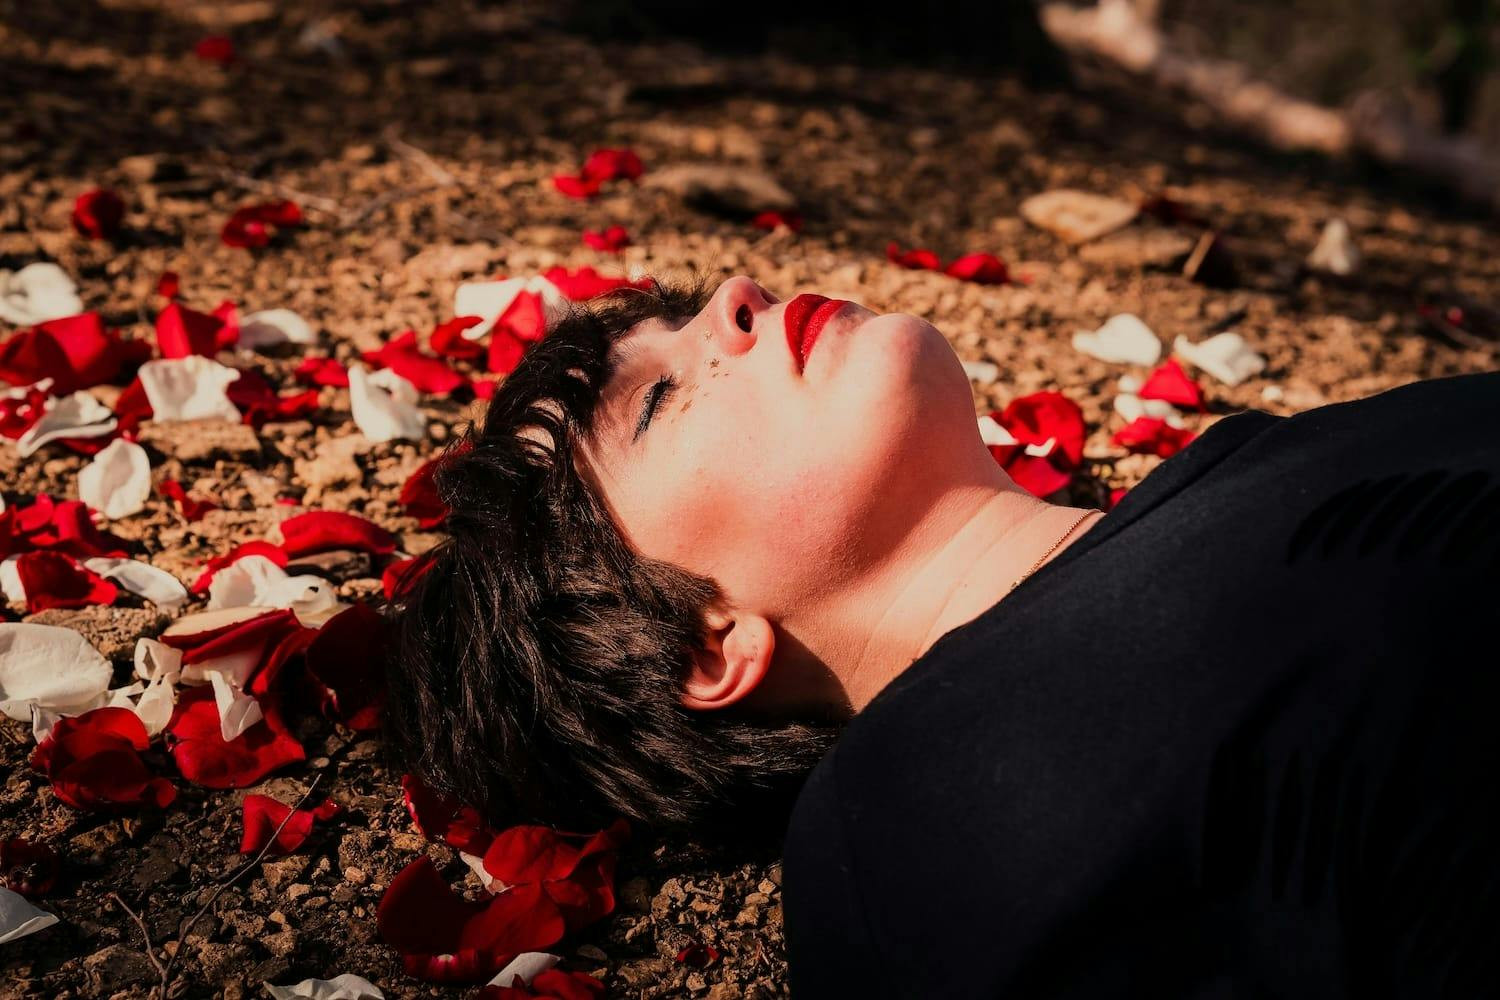 Woman lying down surrounded by rose petals